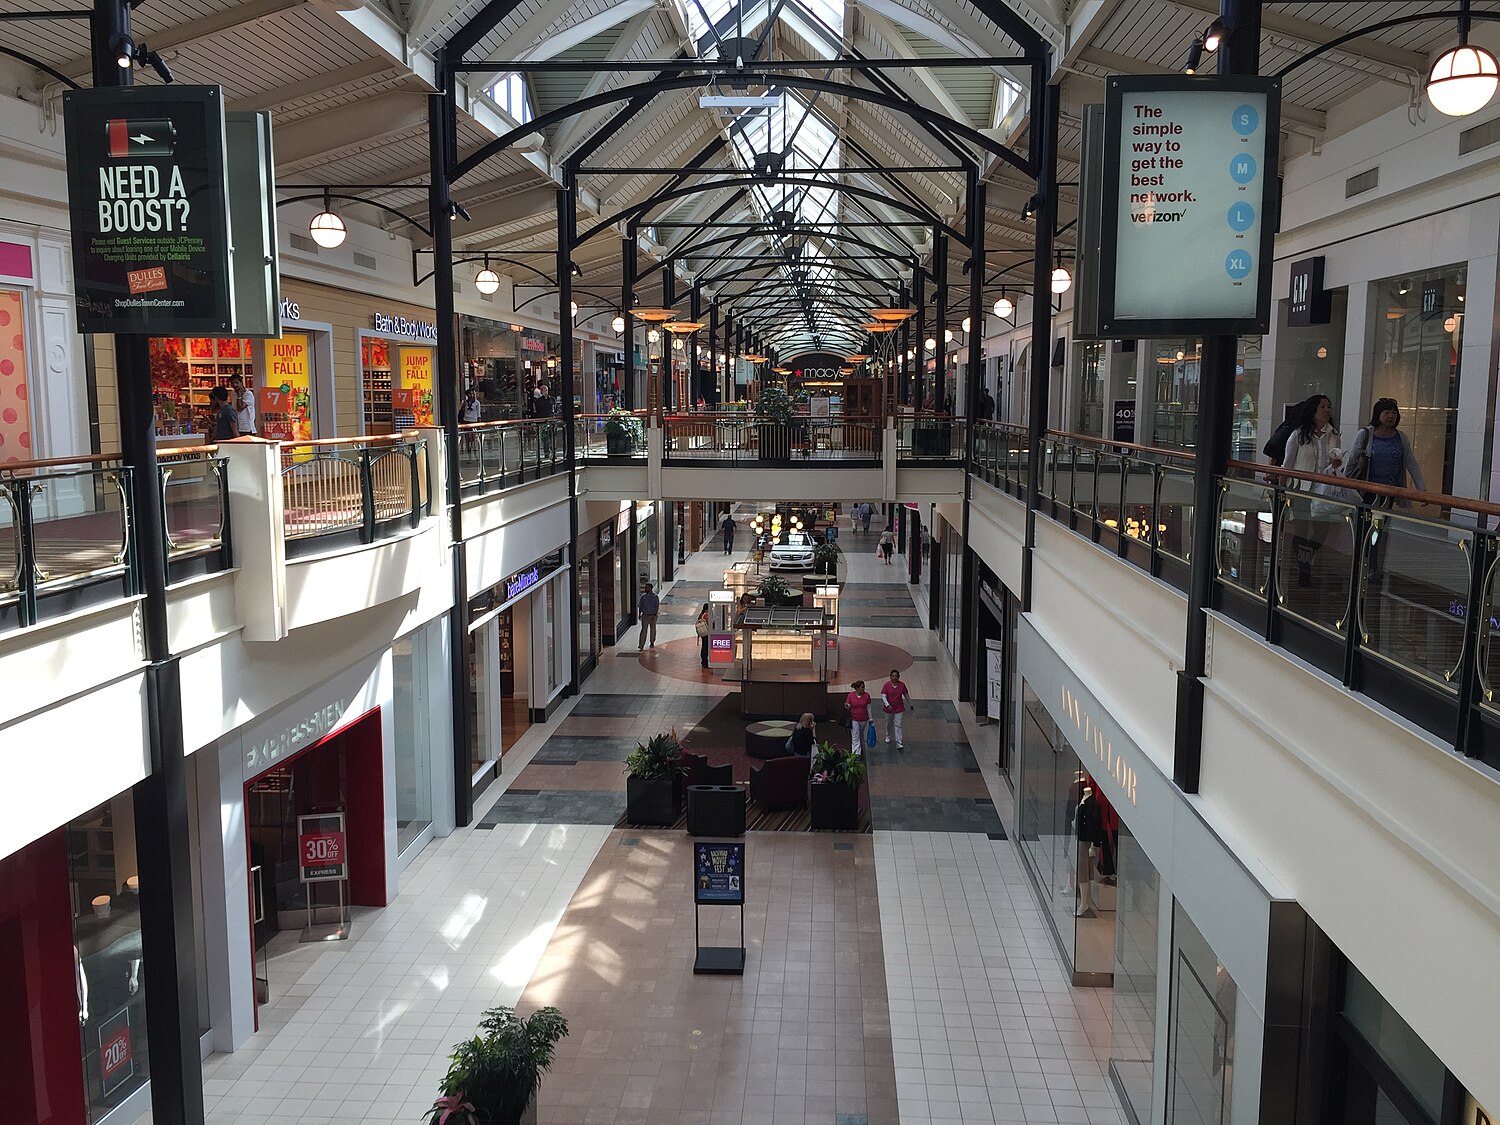 Dulles Town Center ::: Store Directory